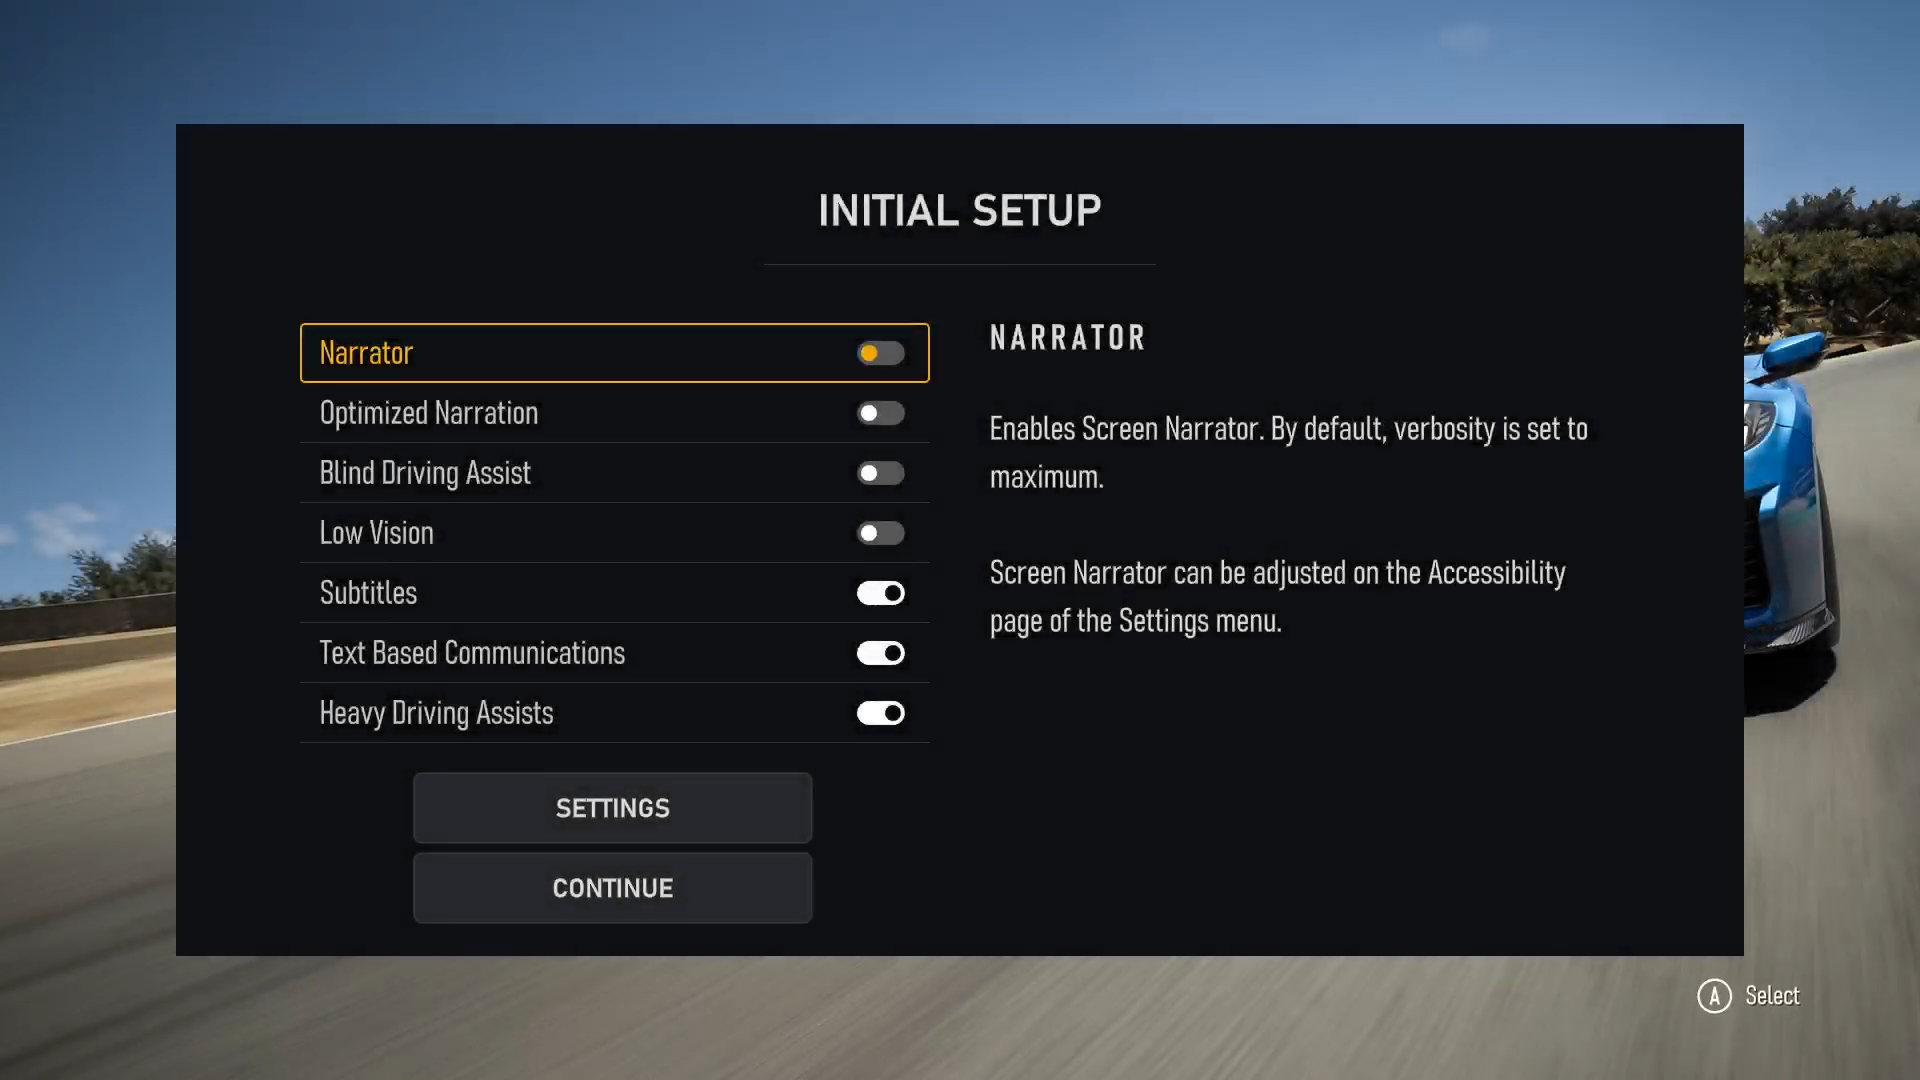 The initial setup screen for Forza Motorsport, showcasing various accessibility settings such as on-screen narration, blind driving assists, subtitles, and more.